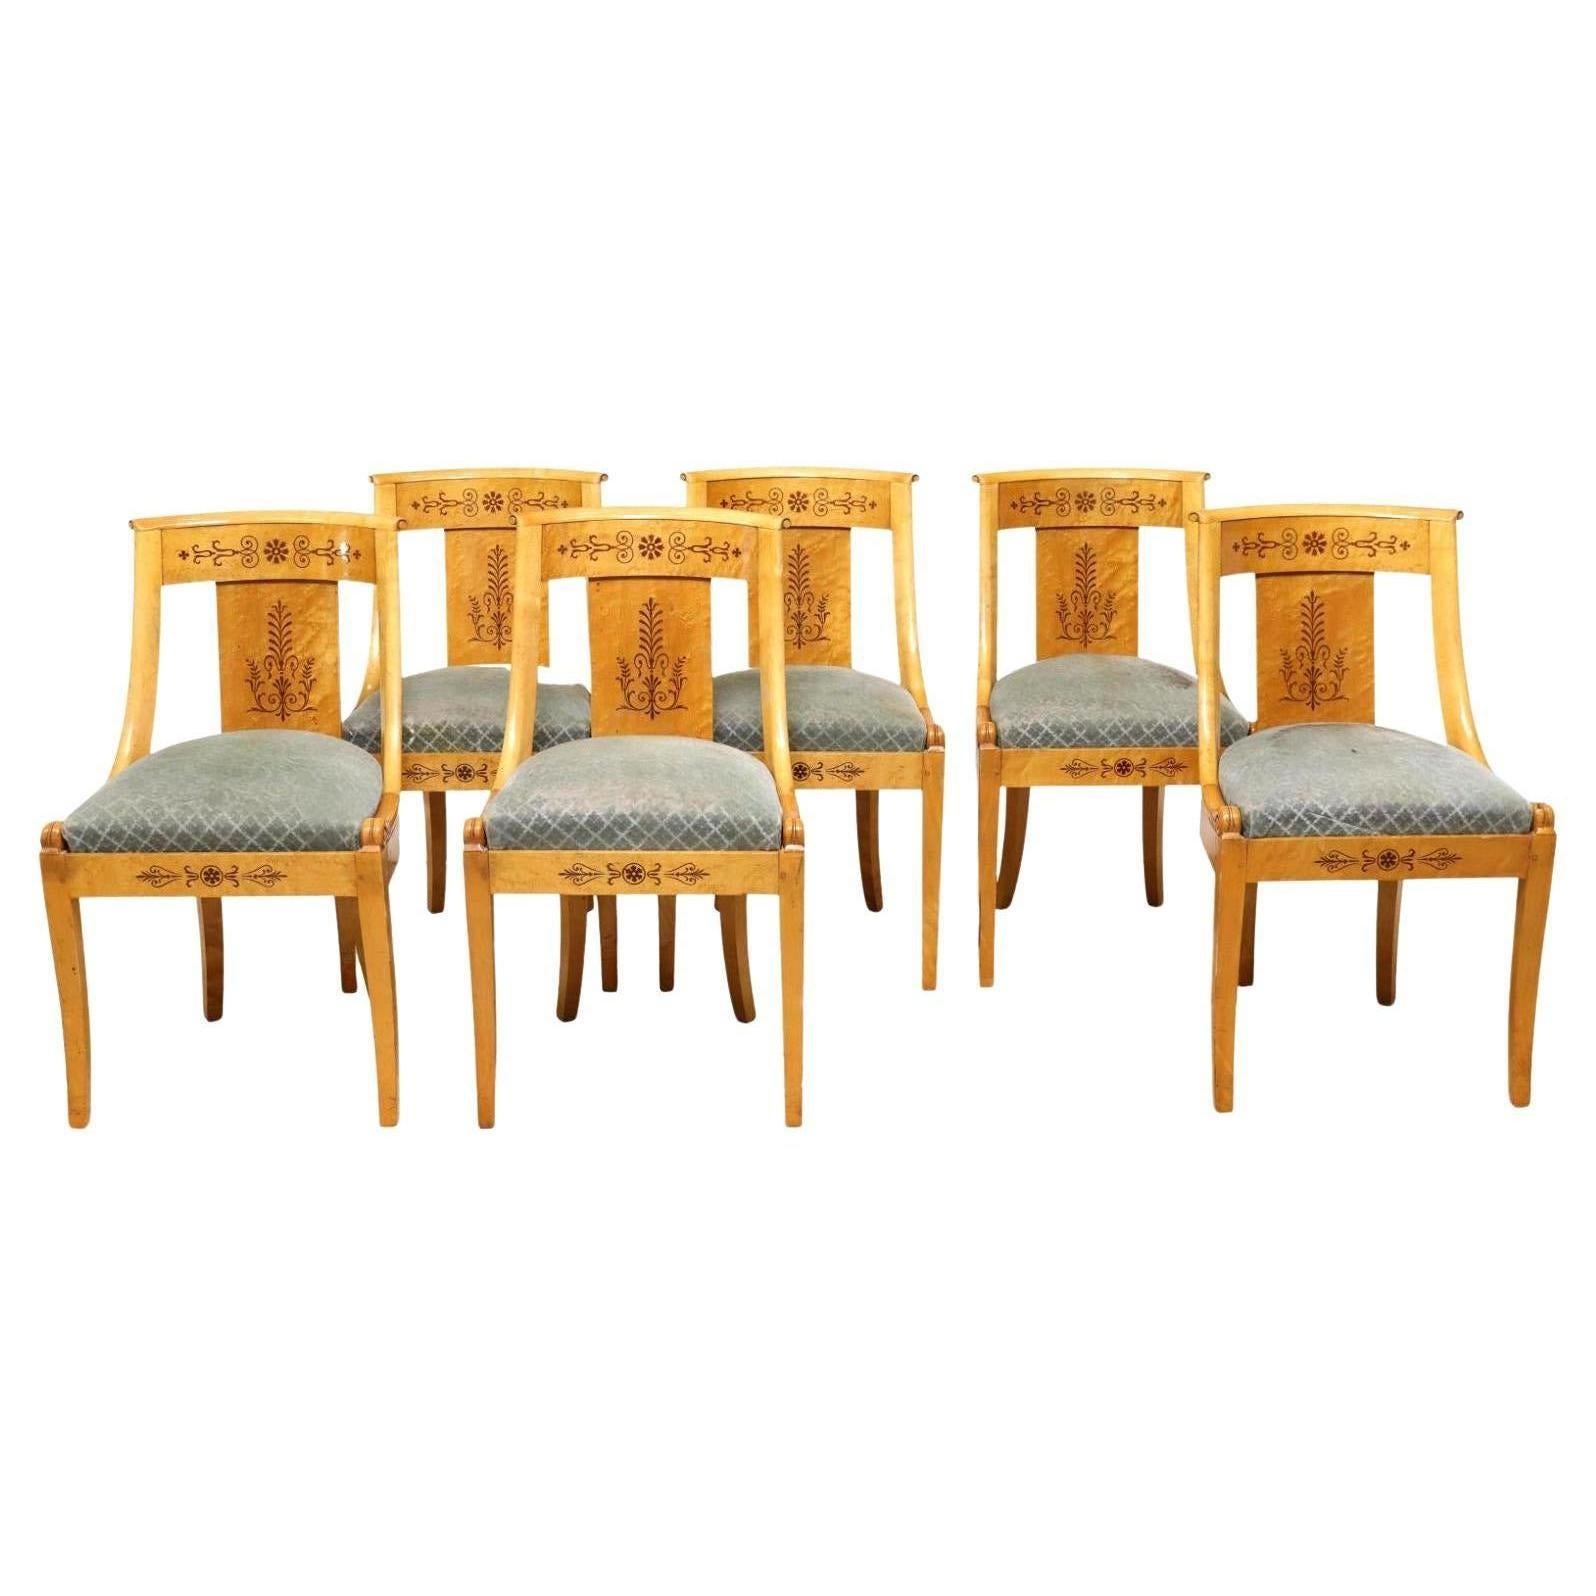 Vintage French Empire Style Dining Chairs, Set of 6